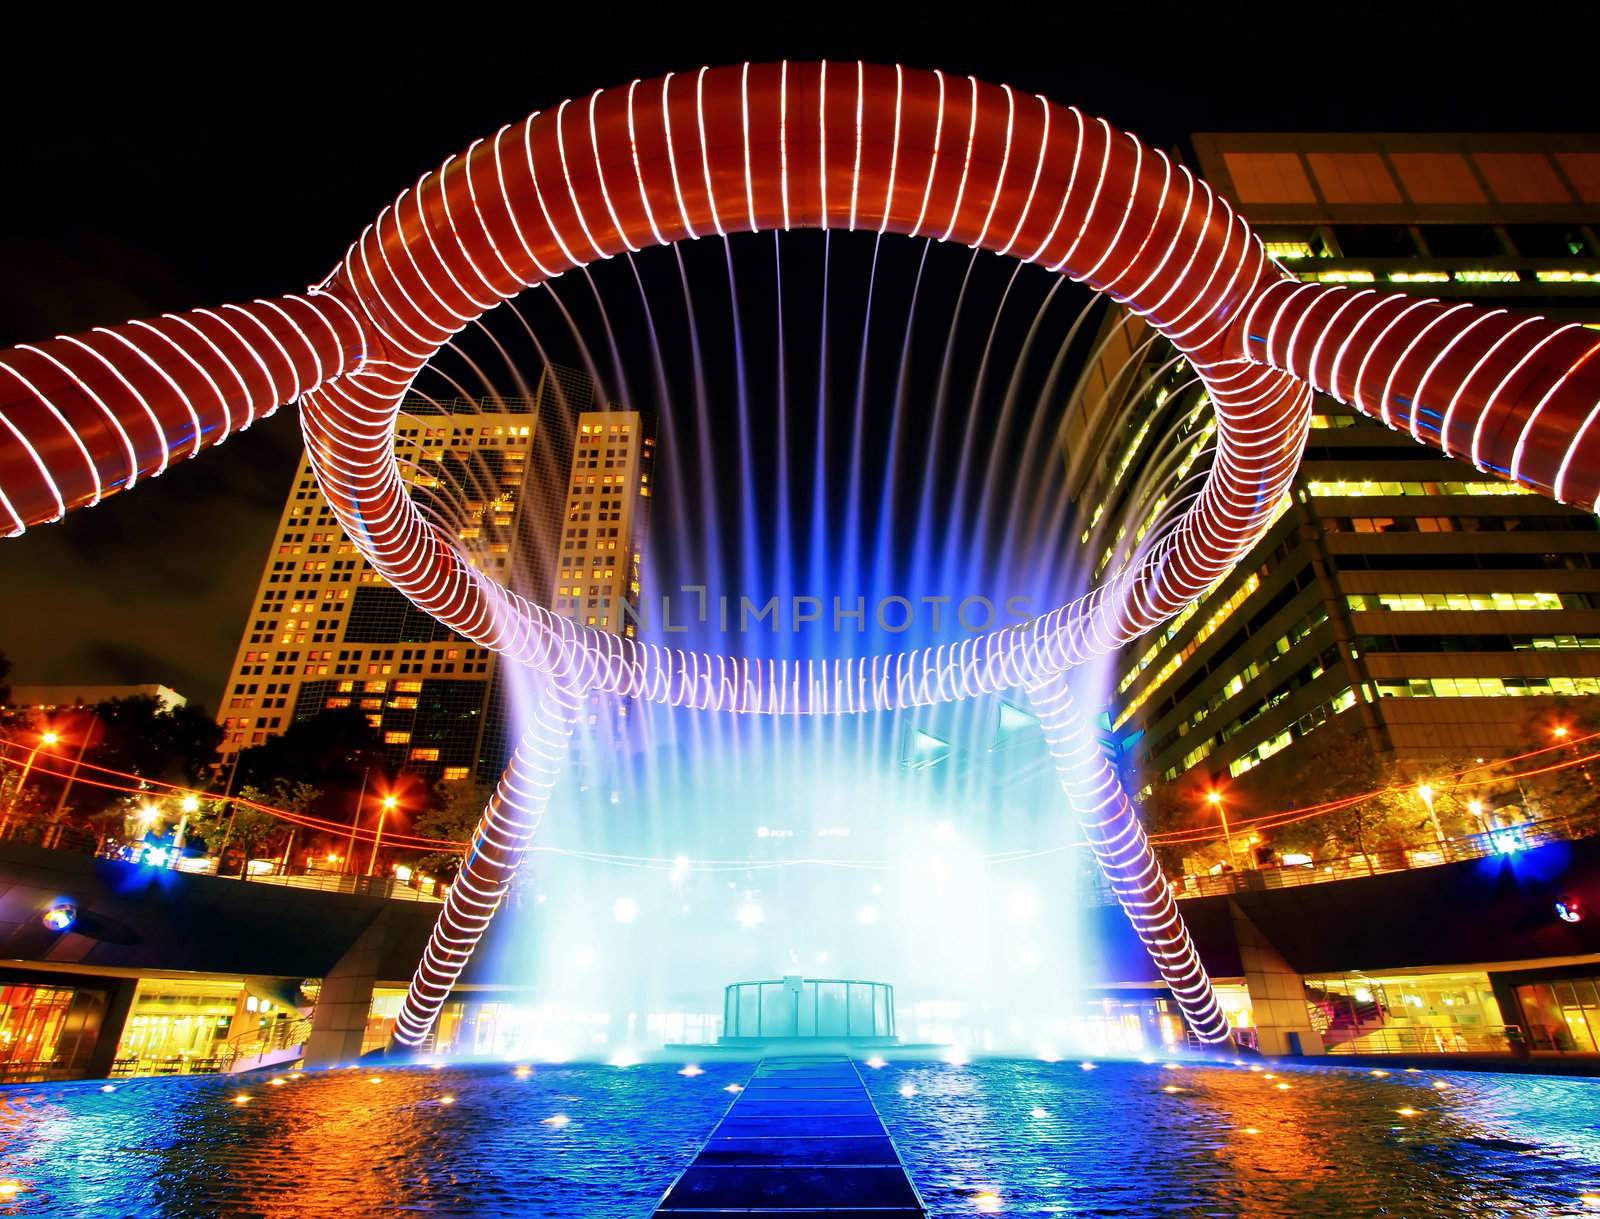 Singapore Fountain of wealth by vichie81